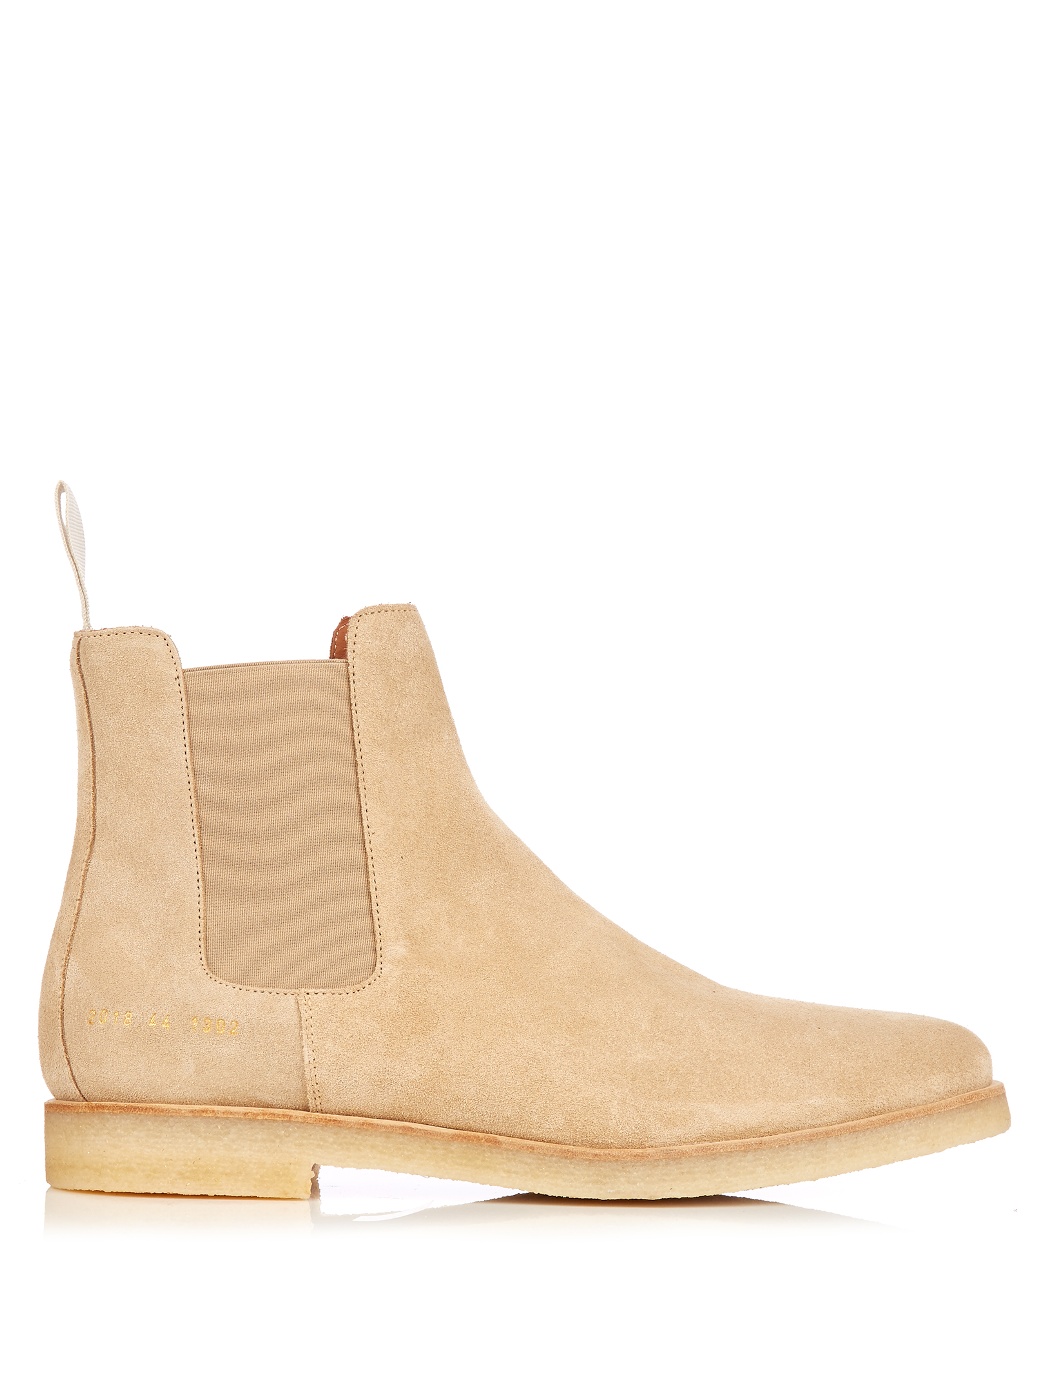 Common Projects Suede Chelsea Boots.jpg